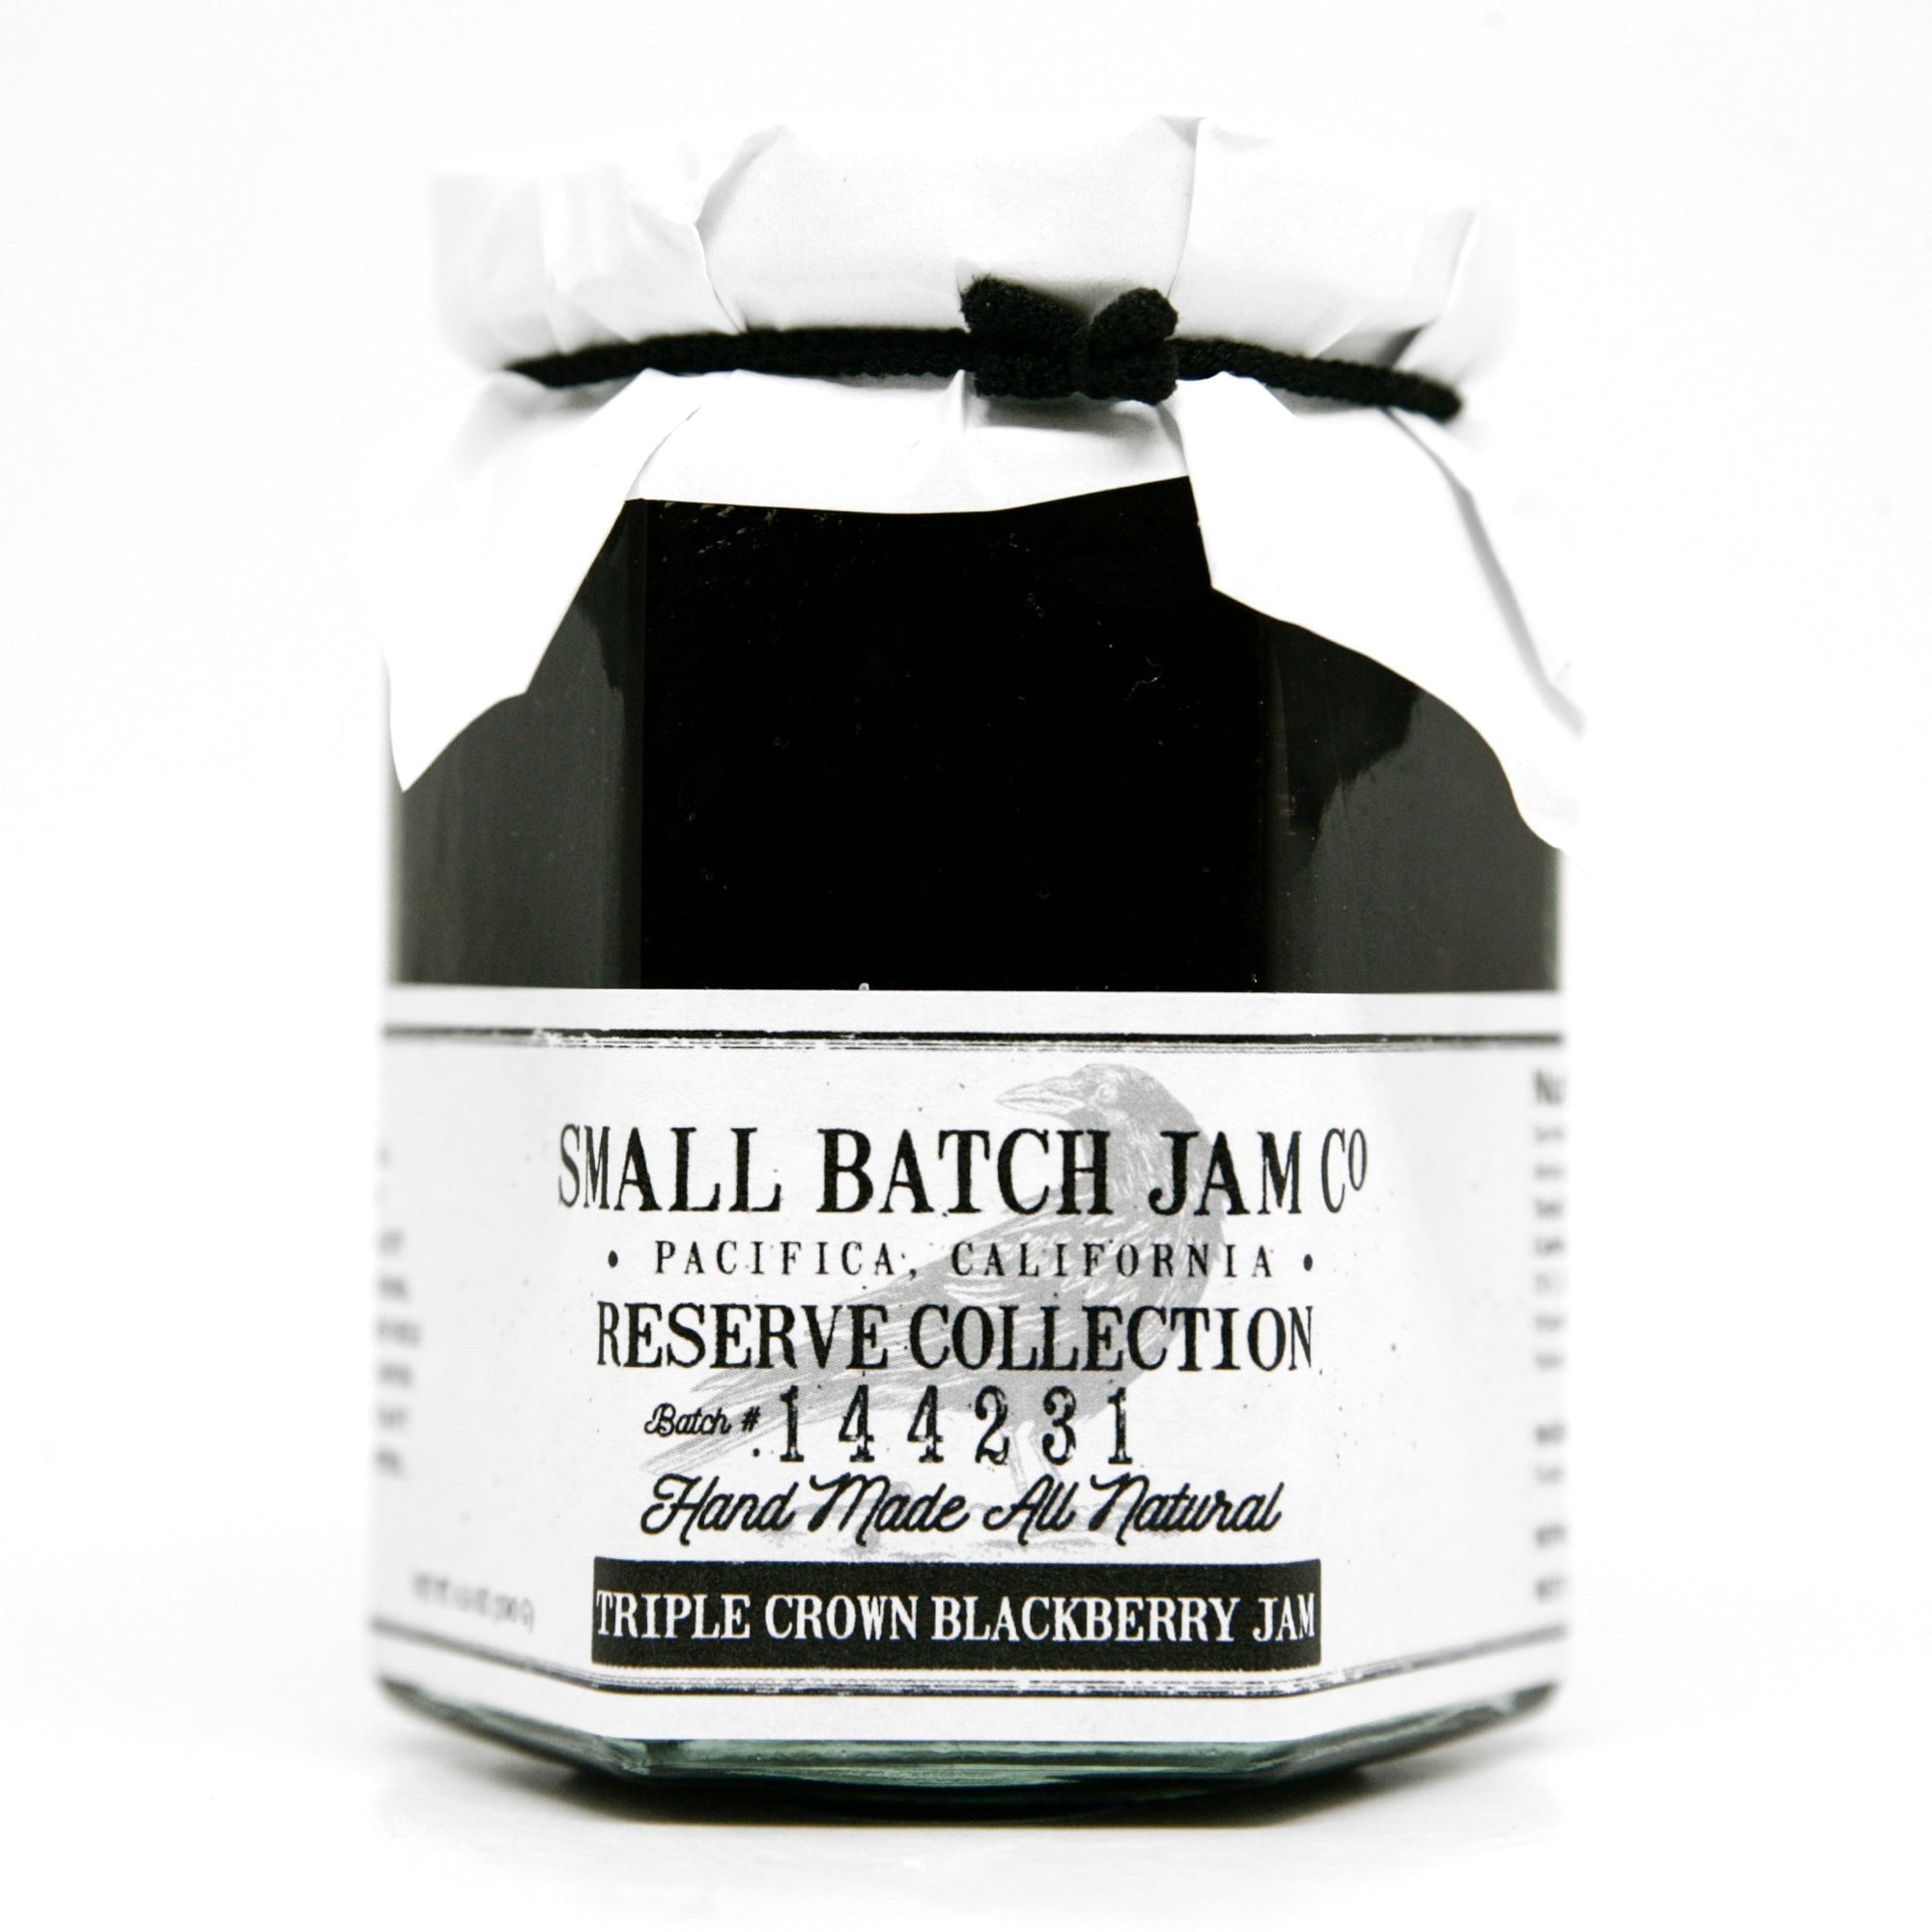 Triple Crown Blackberry Jam - Reserve Collection - Small Batch Jam Co